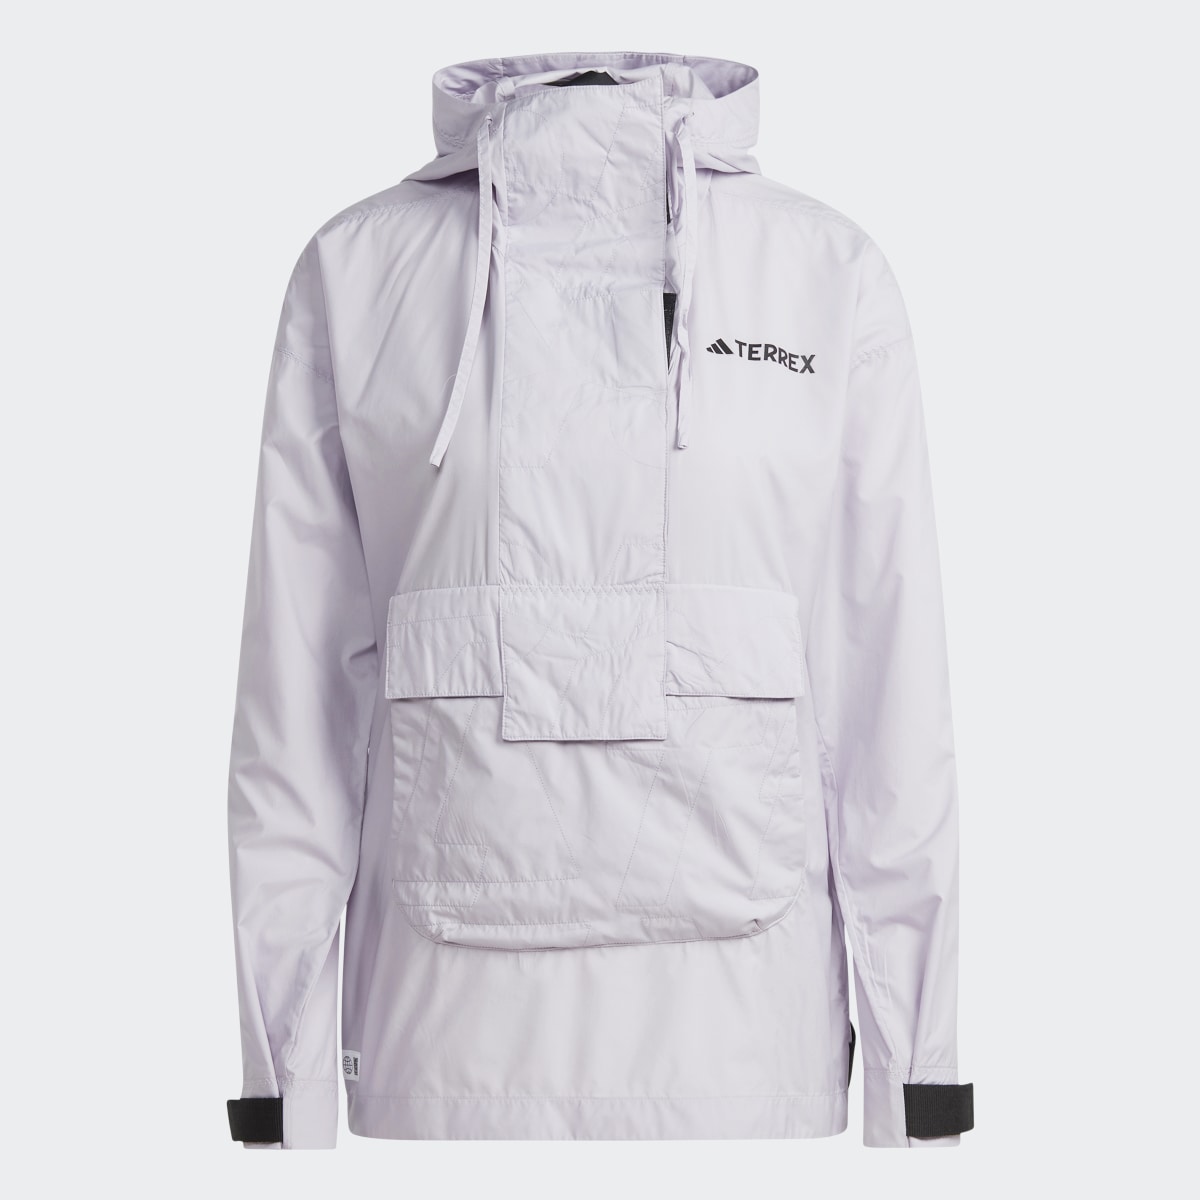 Adidas TERREX Made to Be Remade Wind Anorak. 5